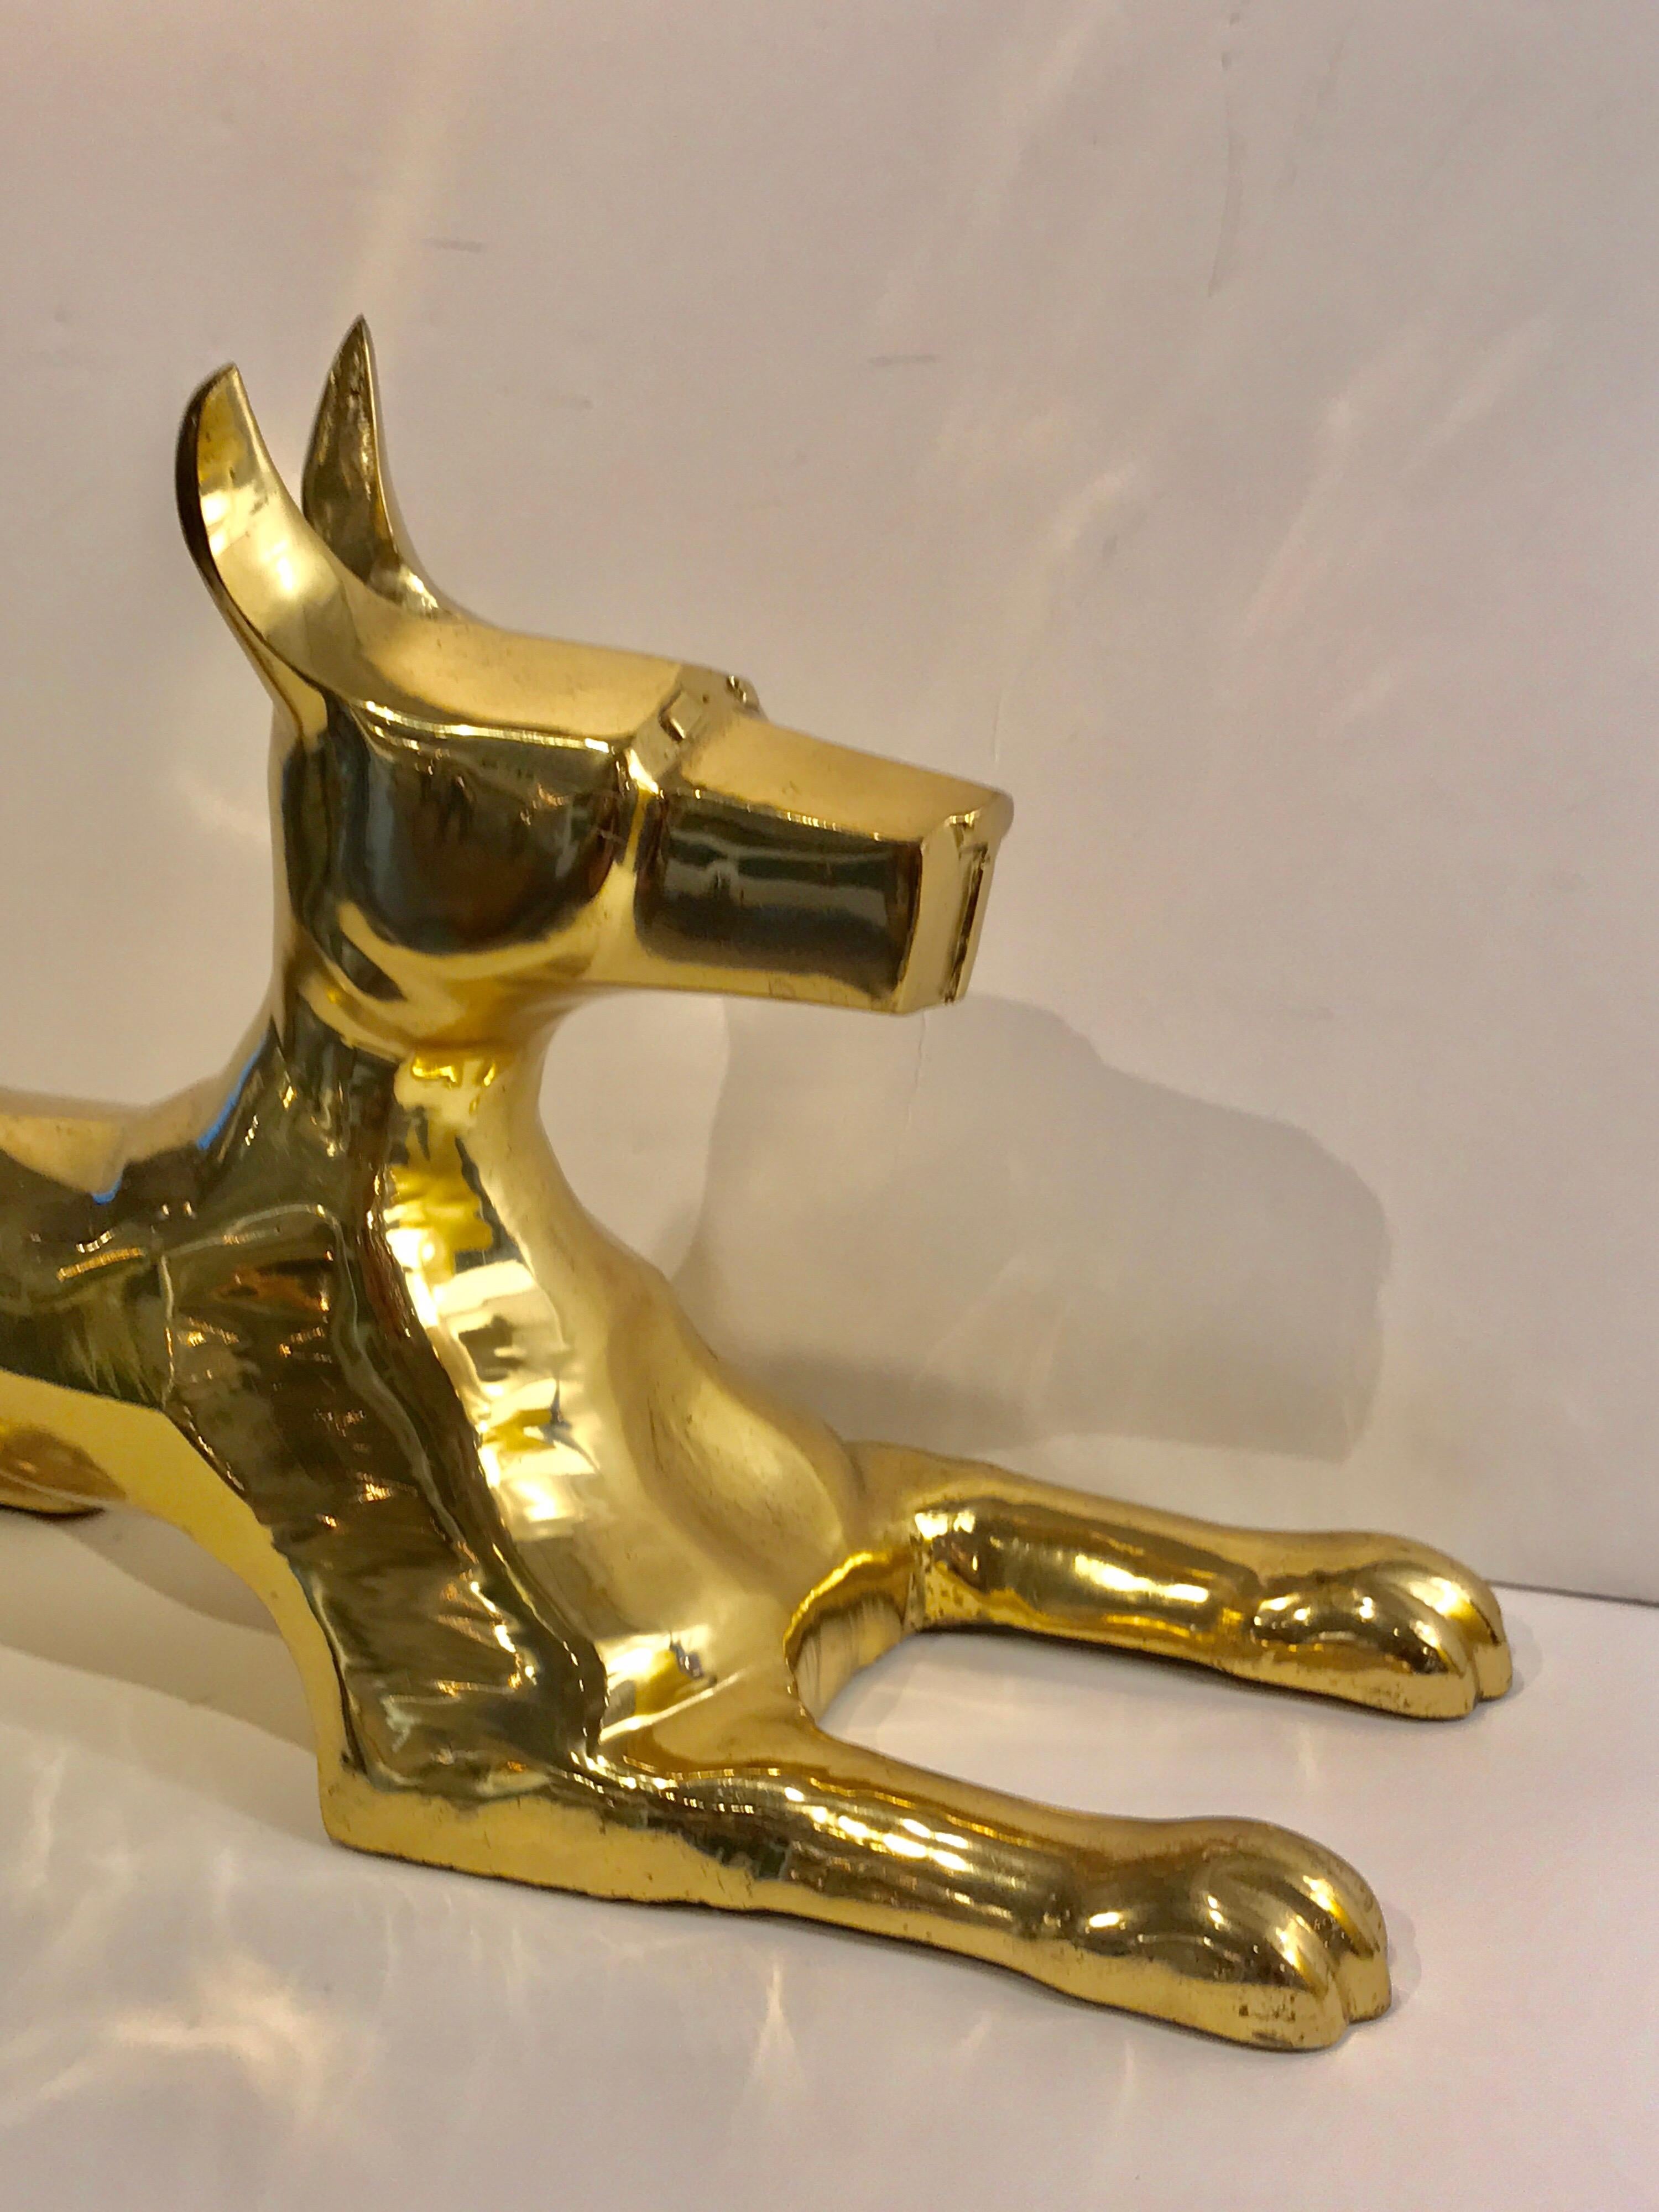 Large modernist brass seated hound, by Sarreid, with squared features and subtle detailed casting.